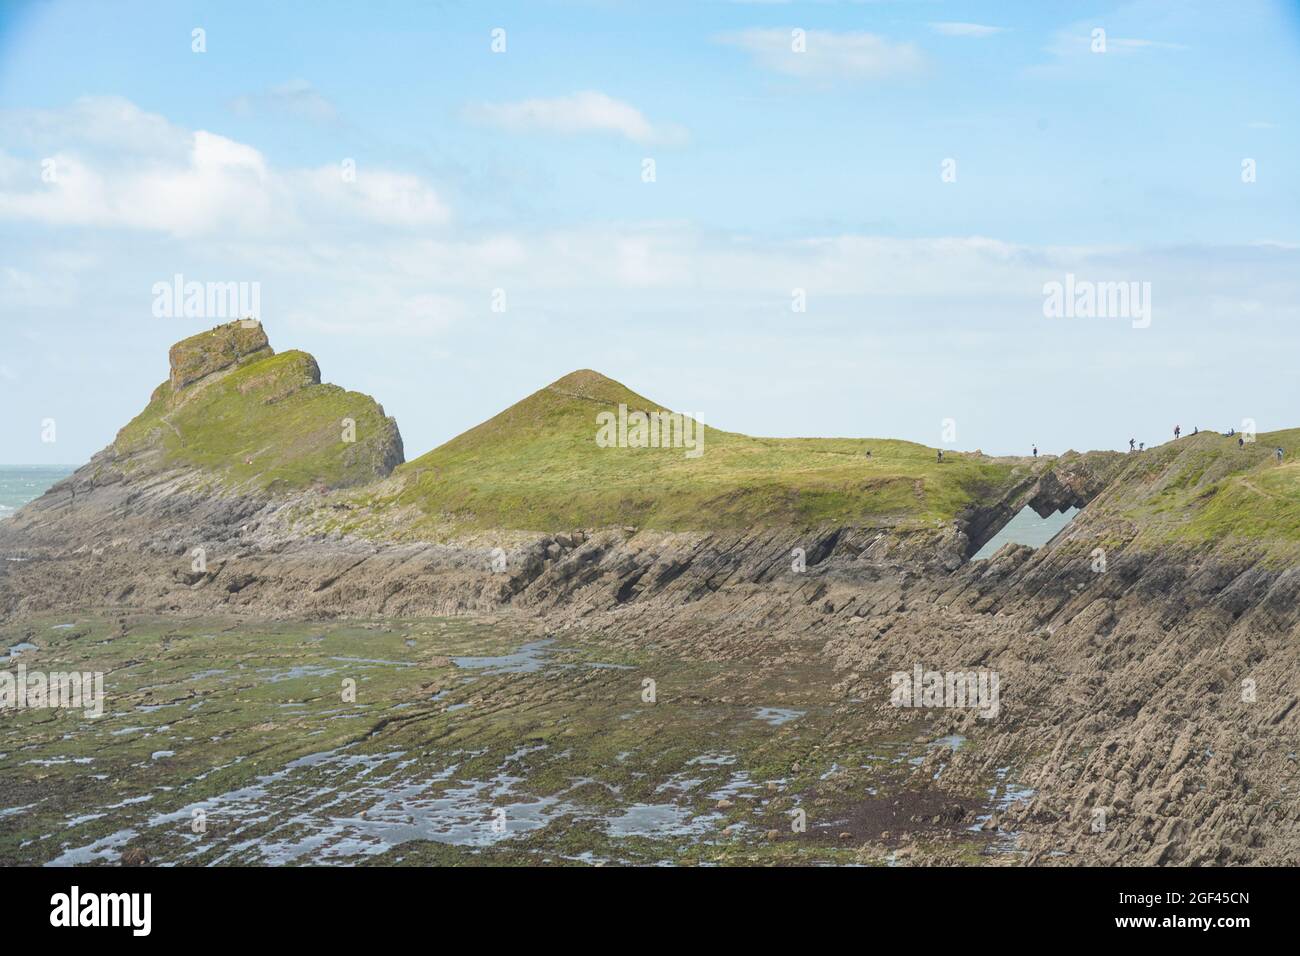 Views of the WormÕs Head Causeway and the DevilÕs Bridge near Rhossili on the Gower Peninsula in South Wales. Photo date: Sunday, August 8, 2021. Phot Stock Photo